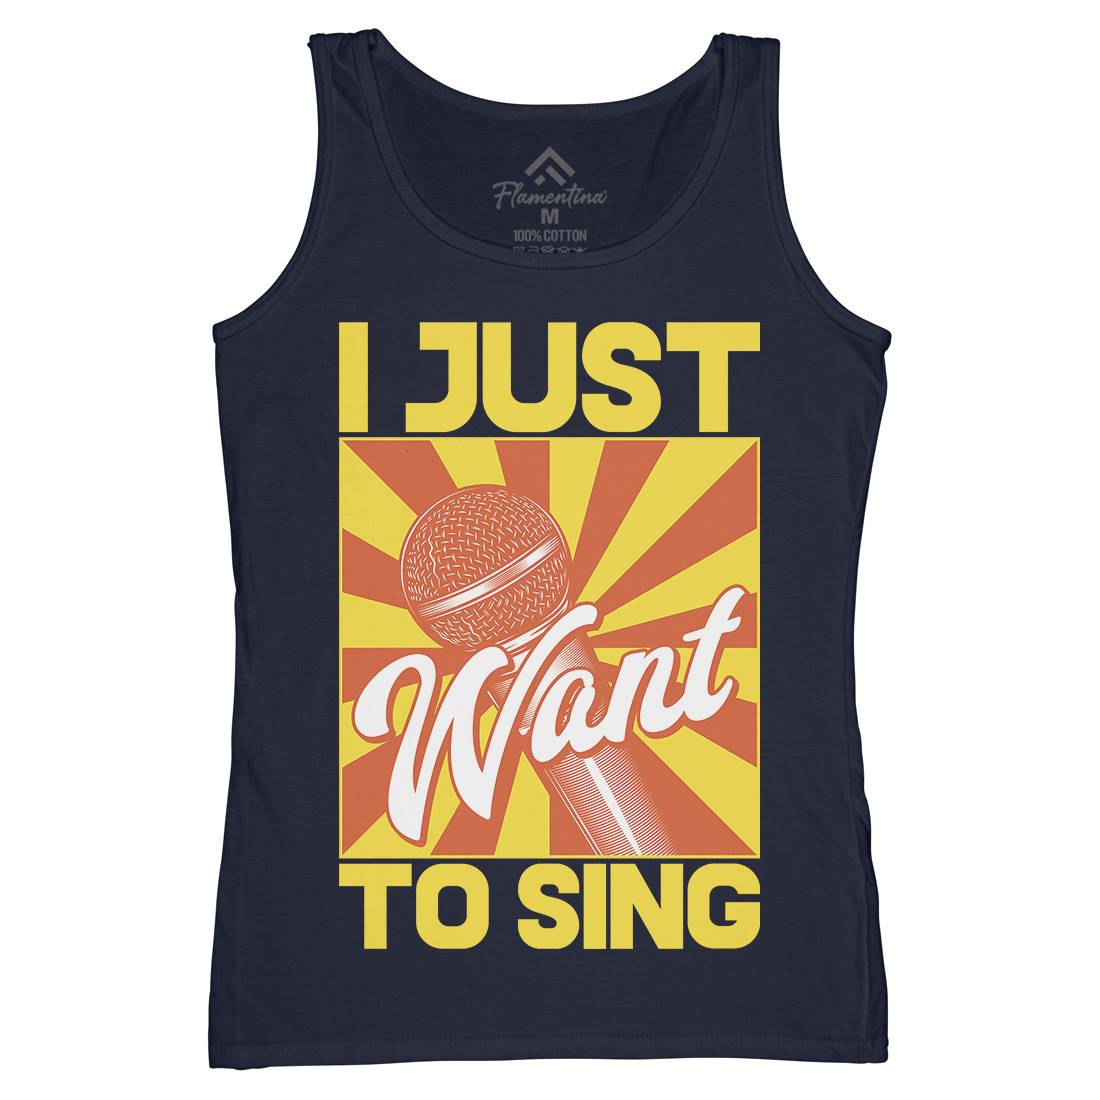 Want To Sing Womens Organic Tank Top Vest Music C866